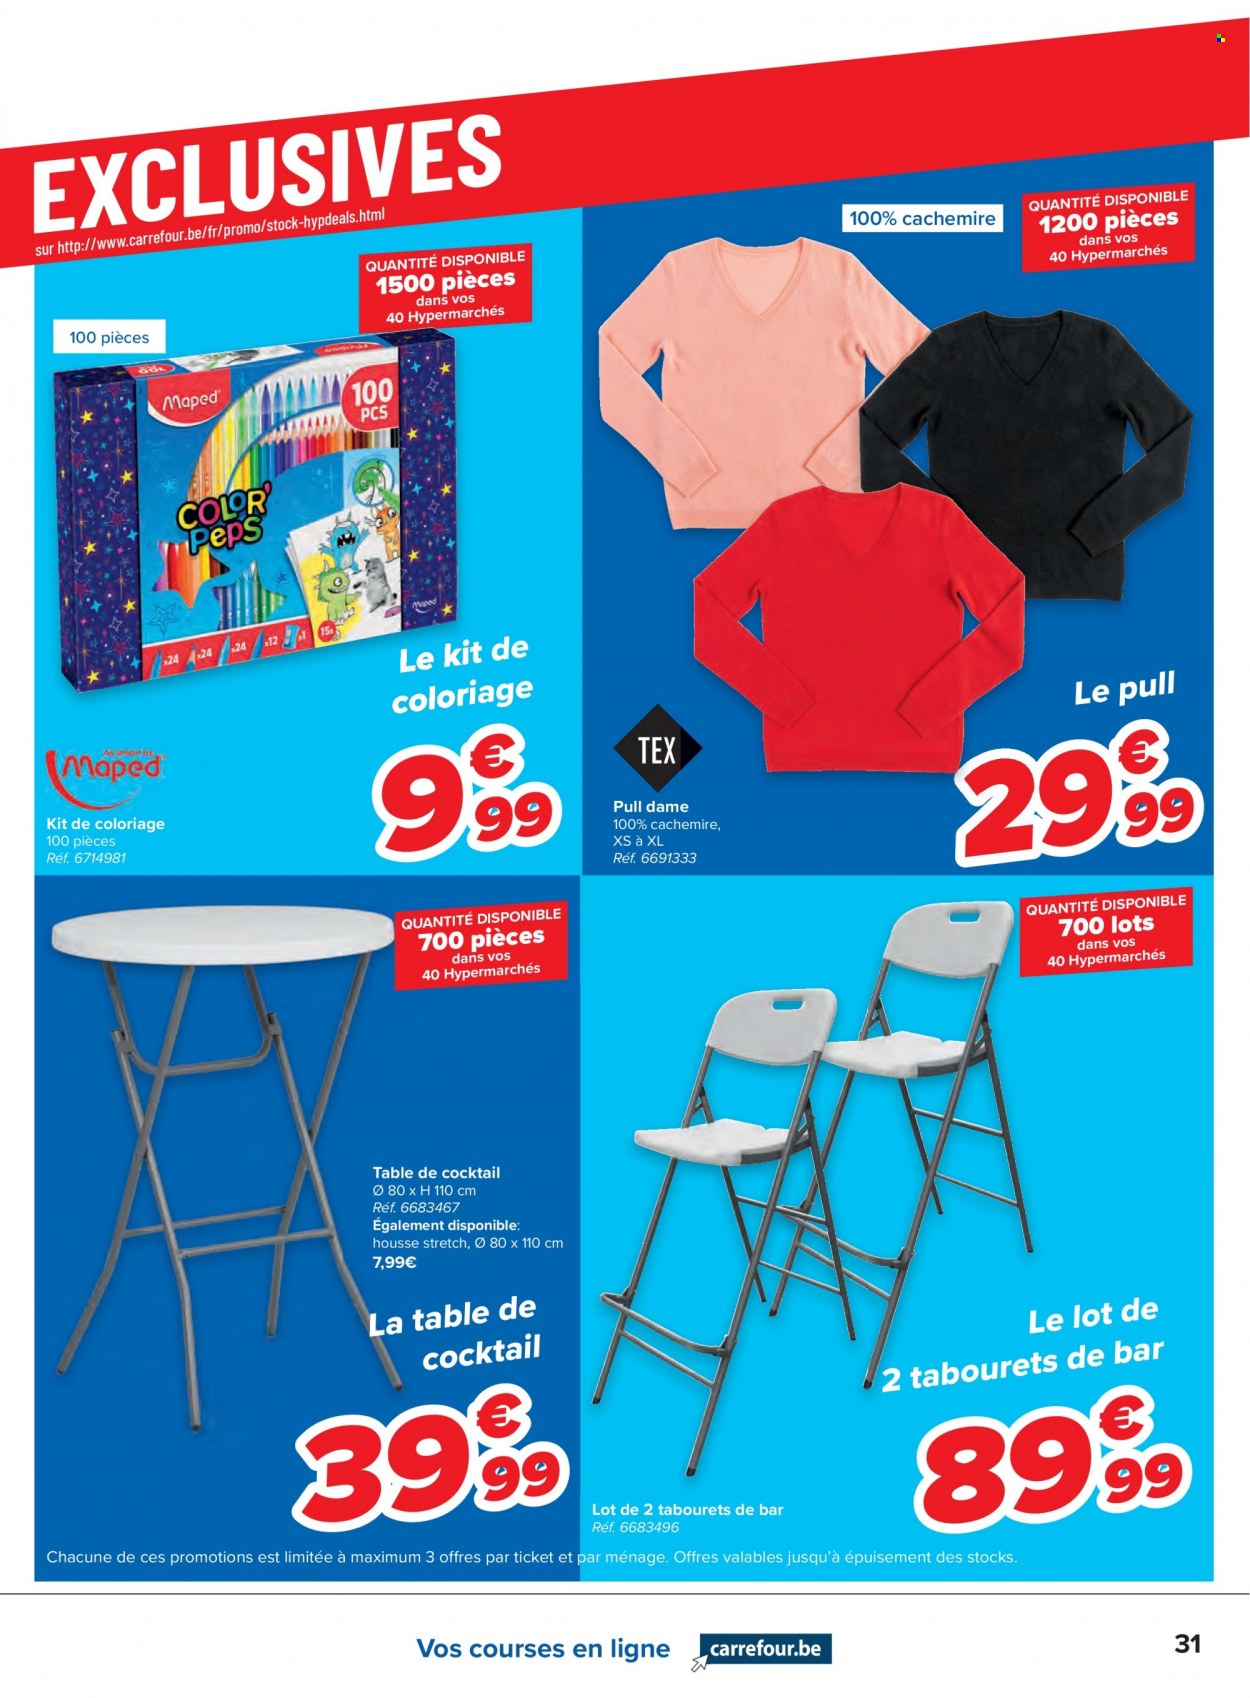 Catalogue Carrefour hypermarkt - 24.11.2021 - 6.12.2021. Page 31.